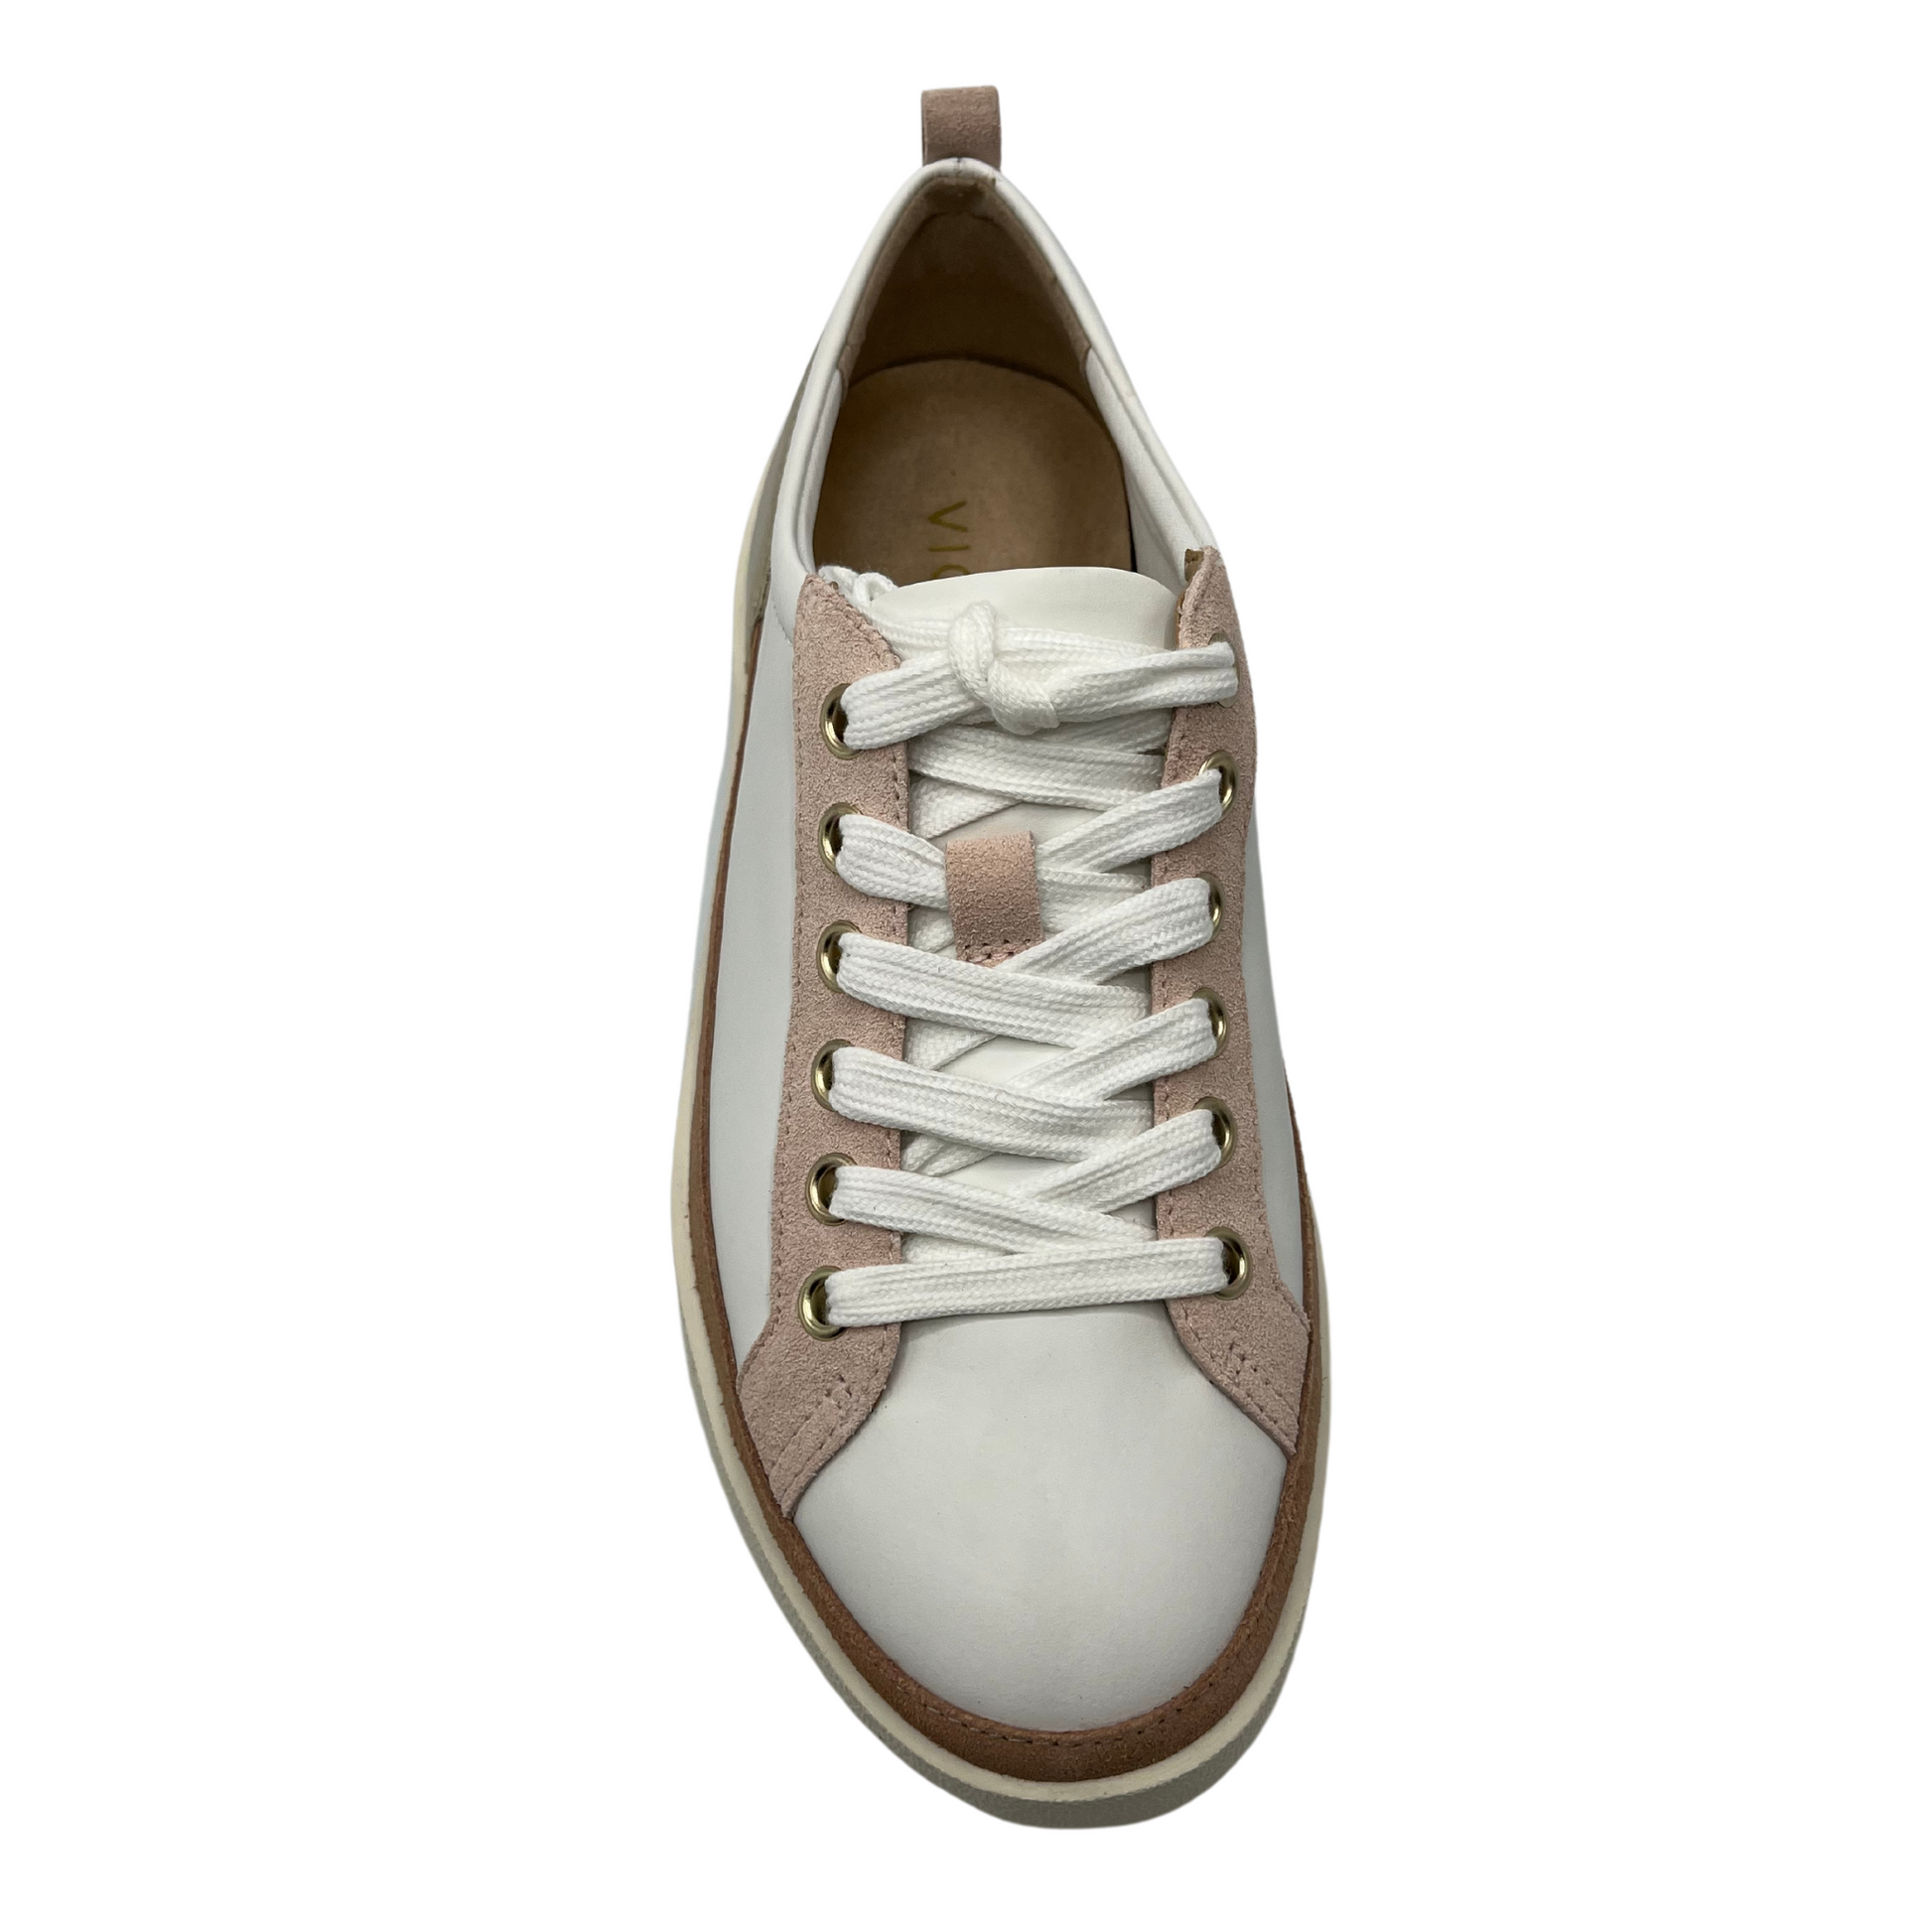 Top view of white leather sneaker with rounded toe and white rubber outsole